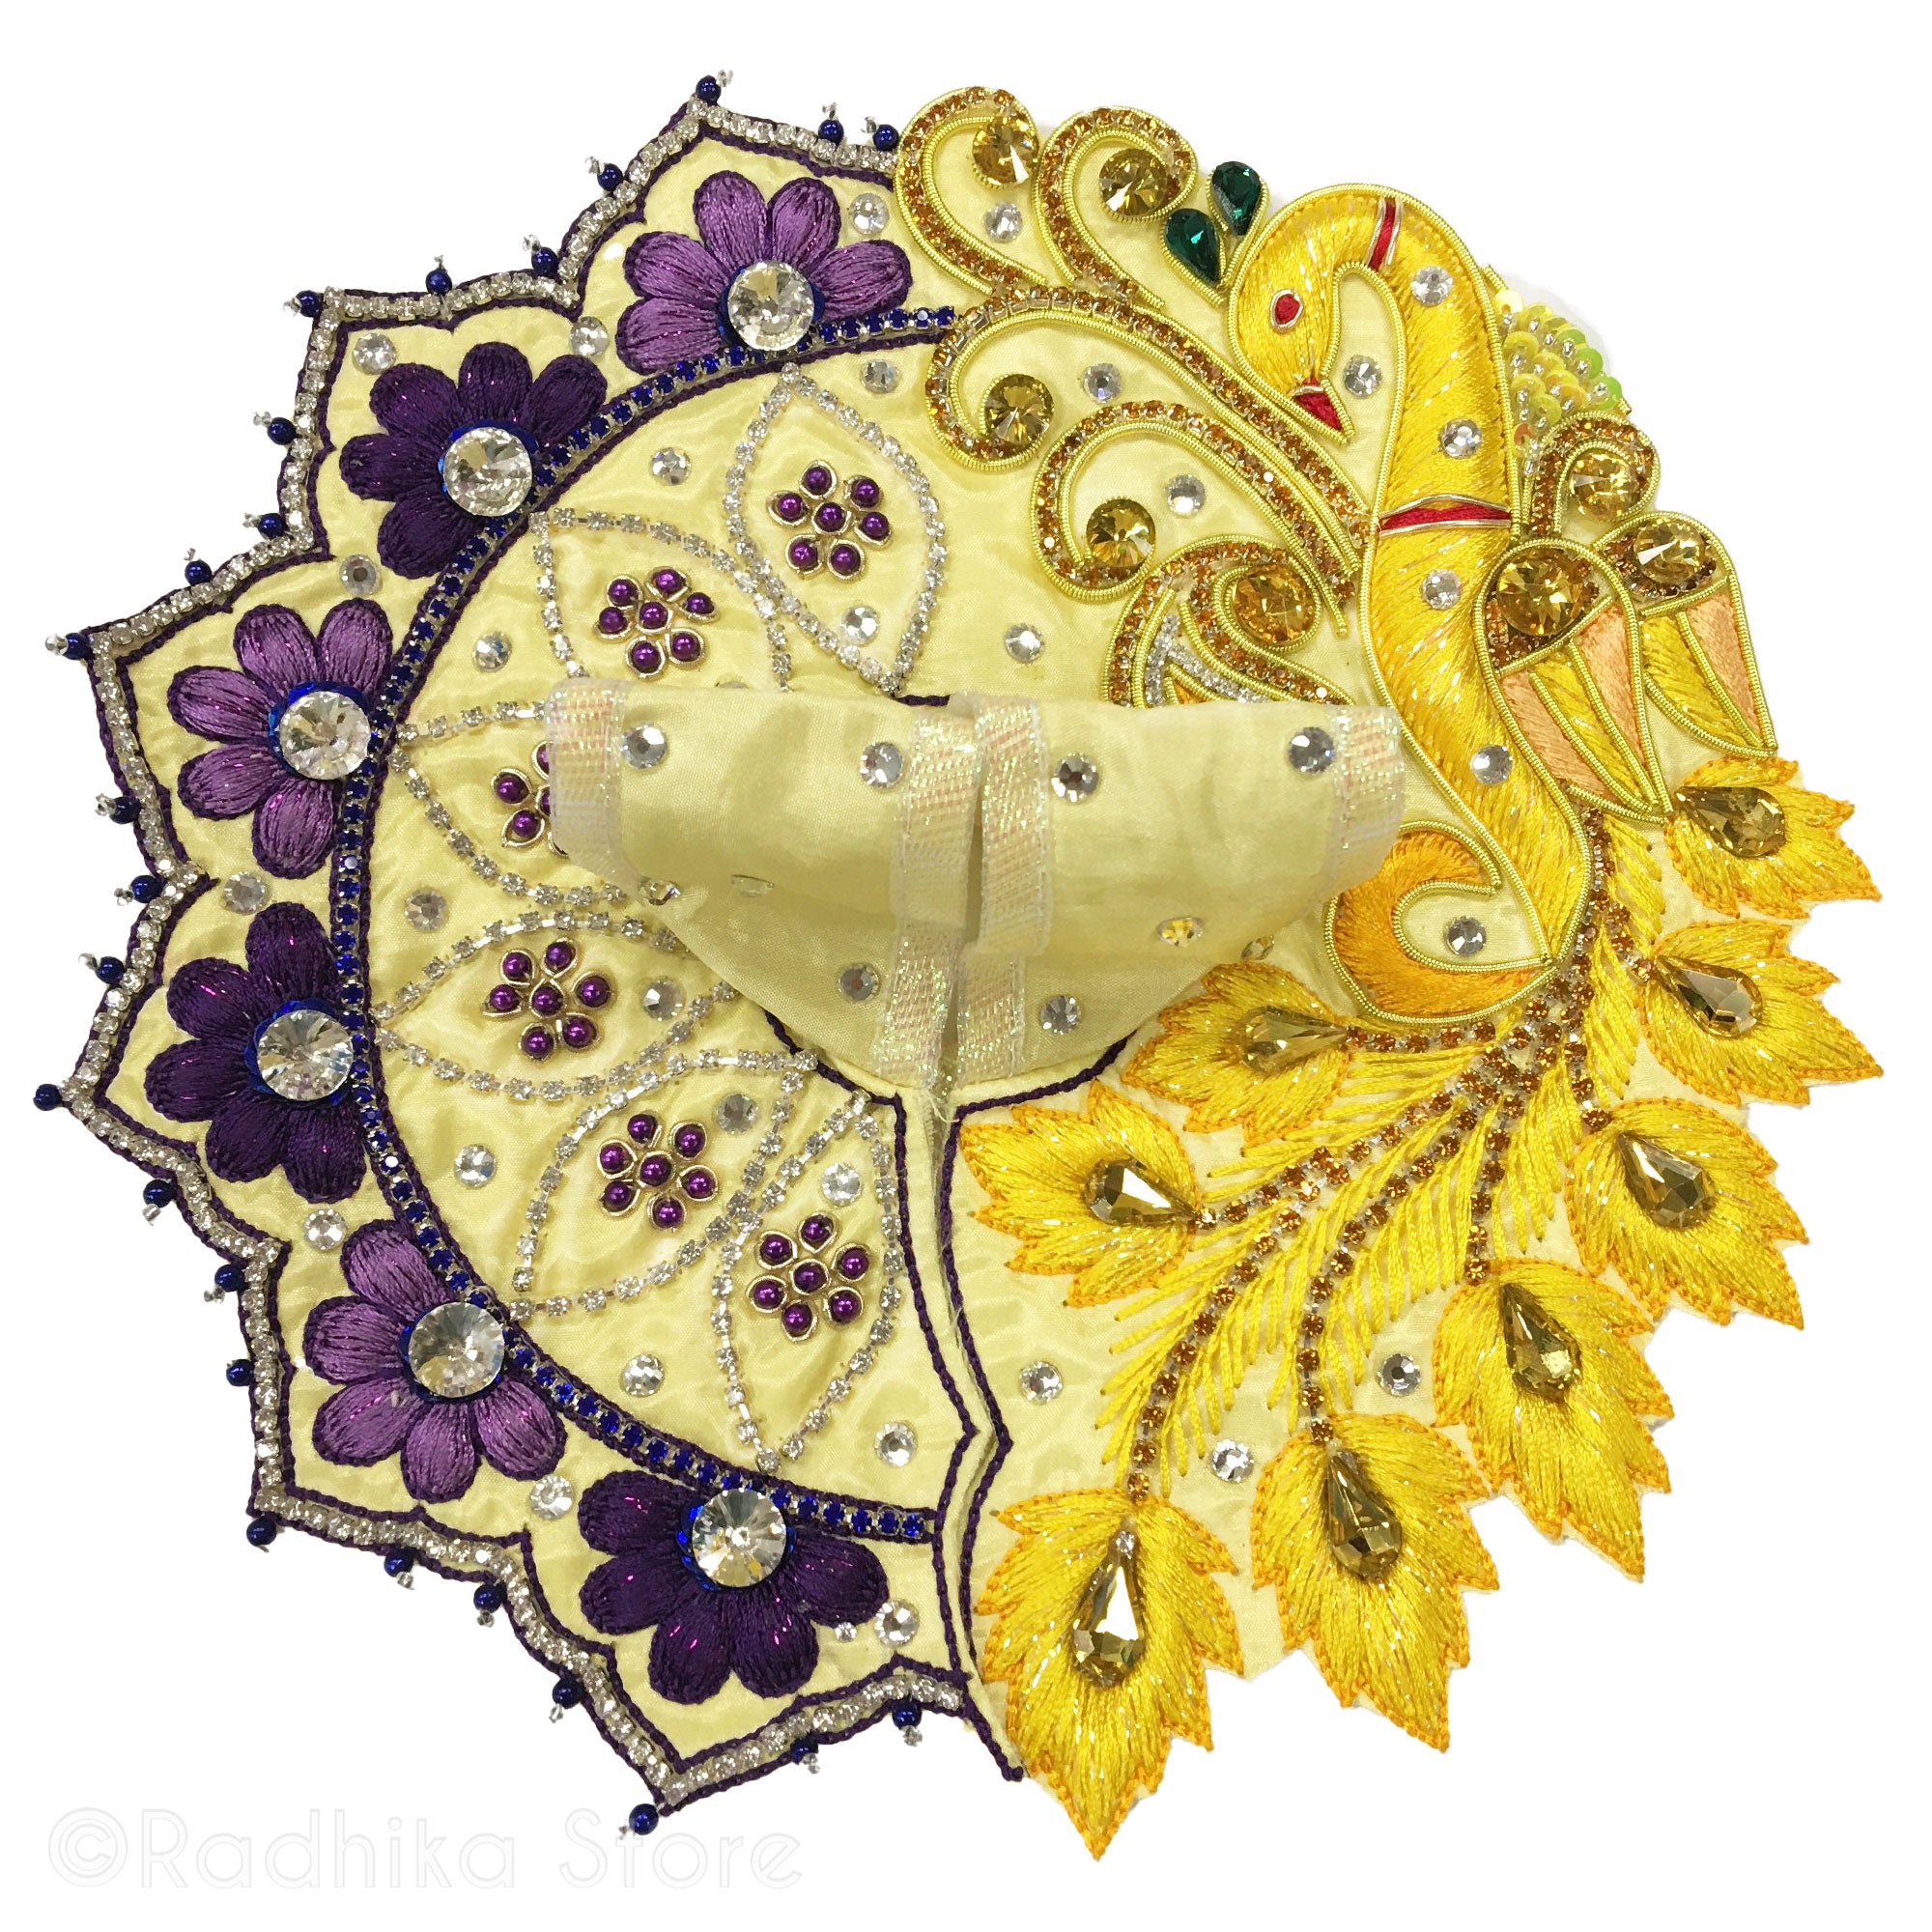 Golden Peacock With Vrindavan Flowers - Light Yellow Taffeta- Size 1" up to 5" Inch Laddu Gopal